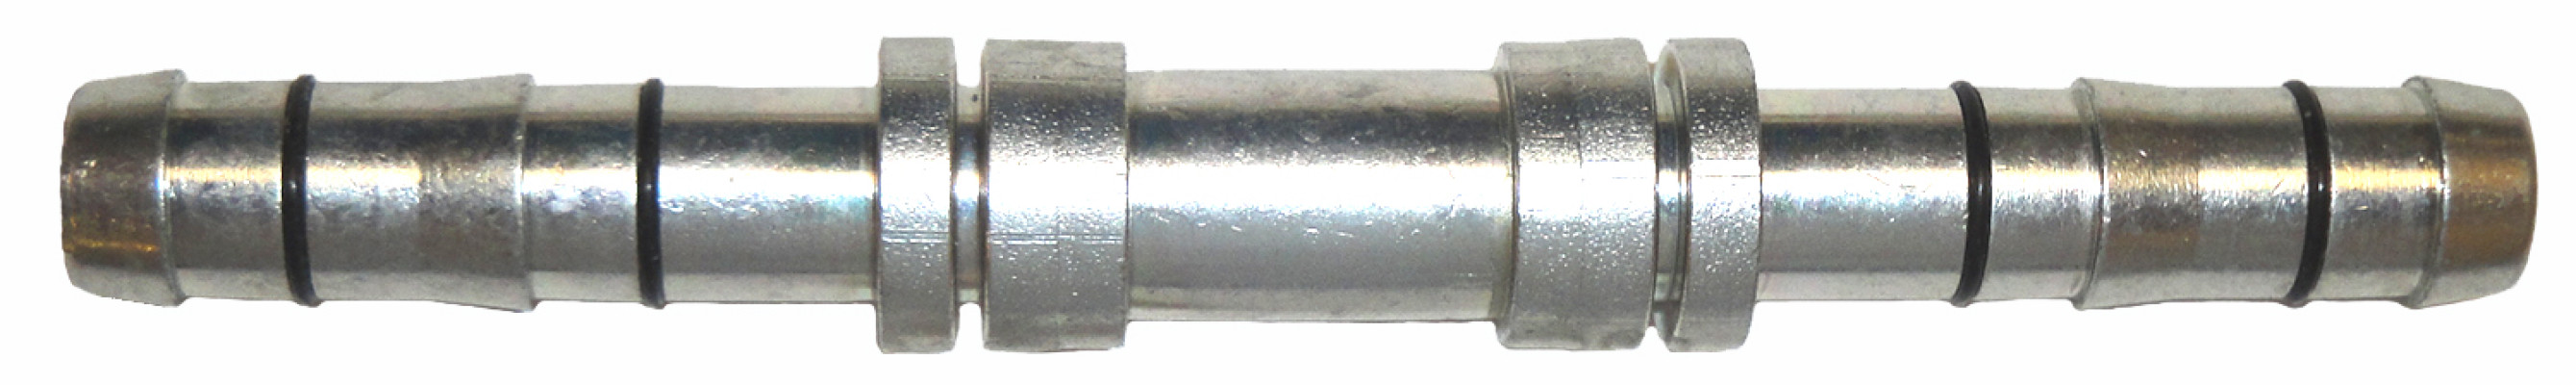 Image of A/C Refrigerant Hose Fitting from Sunair. Part number: FJ3045-0808S